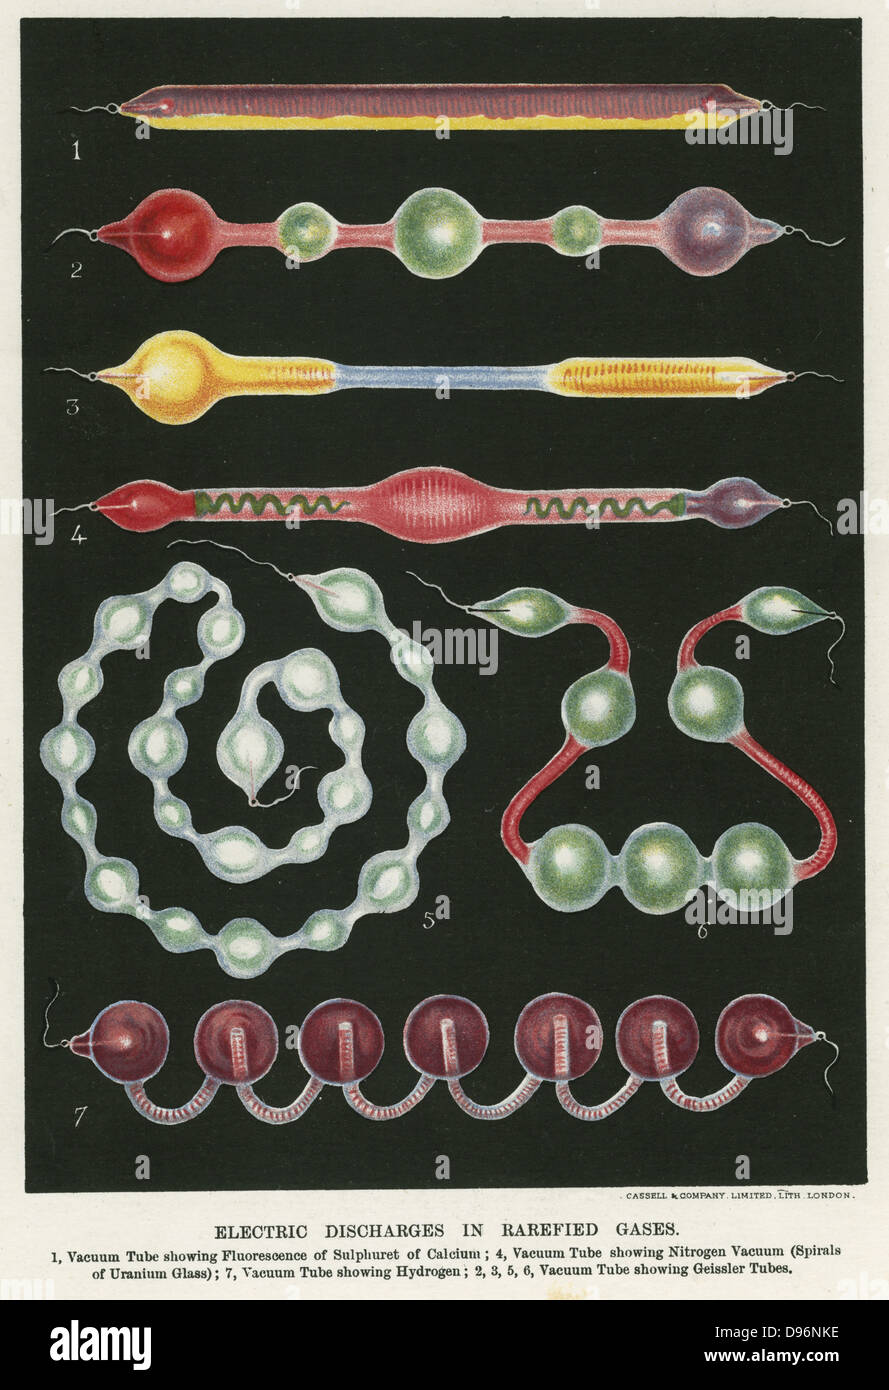 Electric discharges in rarefied gases.  2,3,4 and 6, Geissler tubes. 1 Fluorescence of Sulphuret of calcium. 4 Nitrogen Vacuum (Spirals of Uranium Glass), 7, Hydrogen. From 'The New Popular Educator', (London, 1892). Chromolithograph. Stock Photo